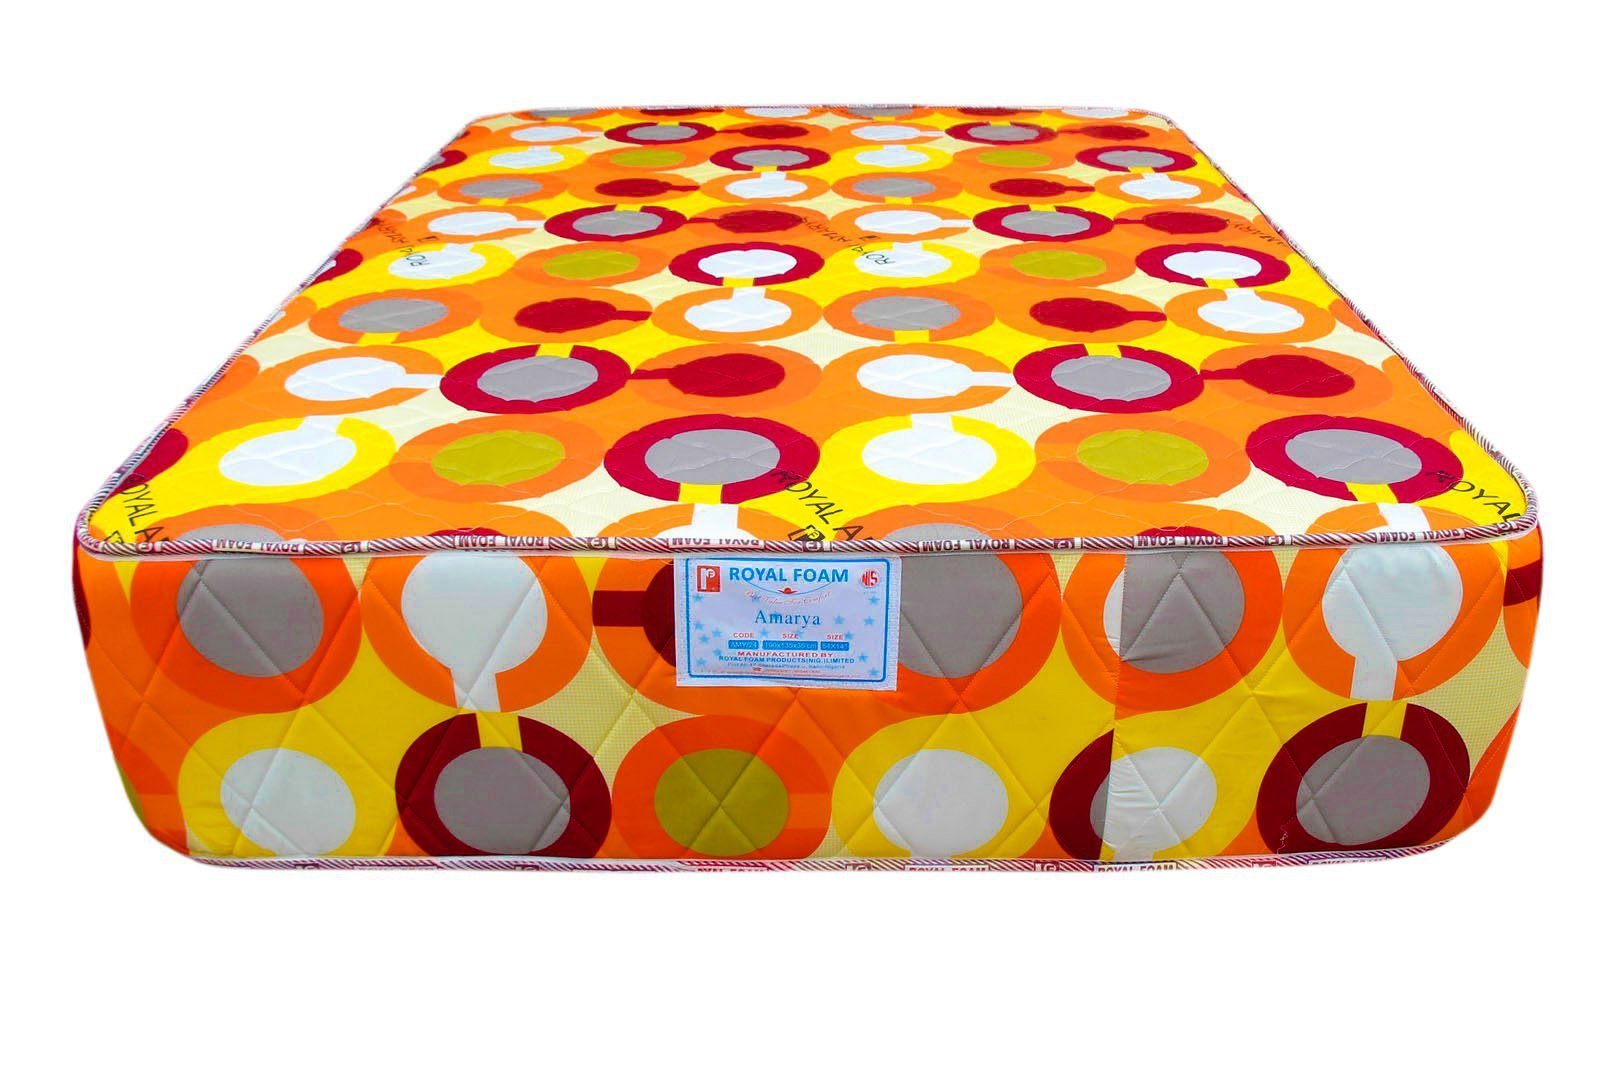 Royal Amarya-Poly Cotton Fabric - 14 Density foam - Fully Quilted Mattress -190X120X30CM [75 X 48 X 12] [6ft X 4ft X 12inches]